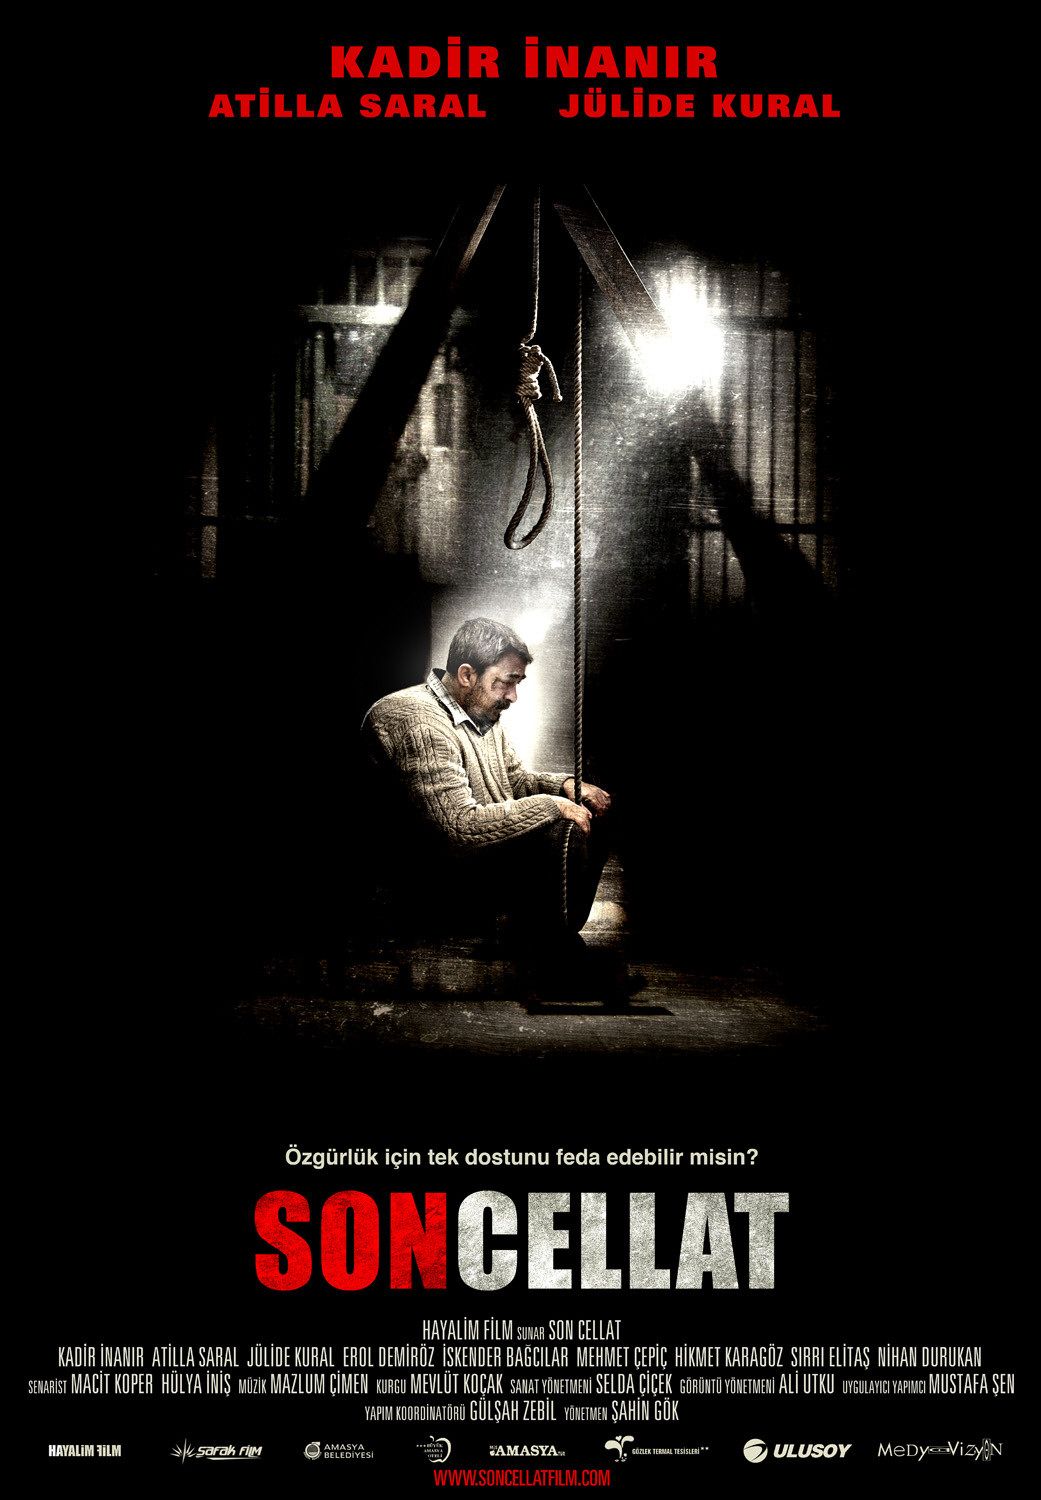 Extra Large Movie Poster Image for Son cellat 